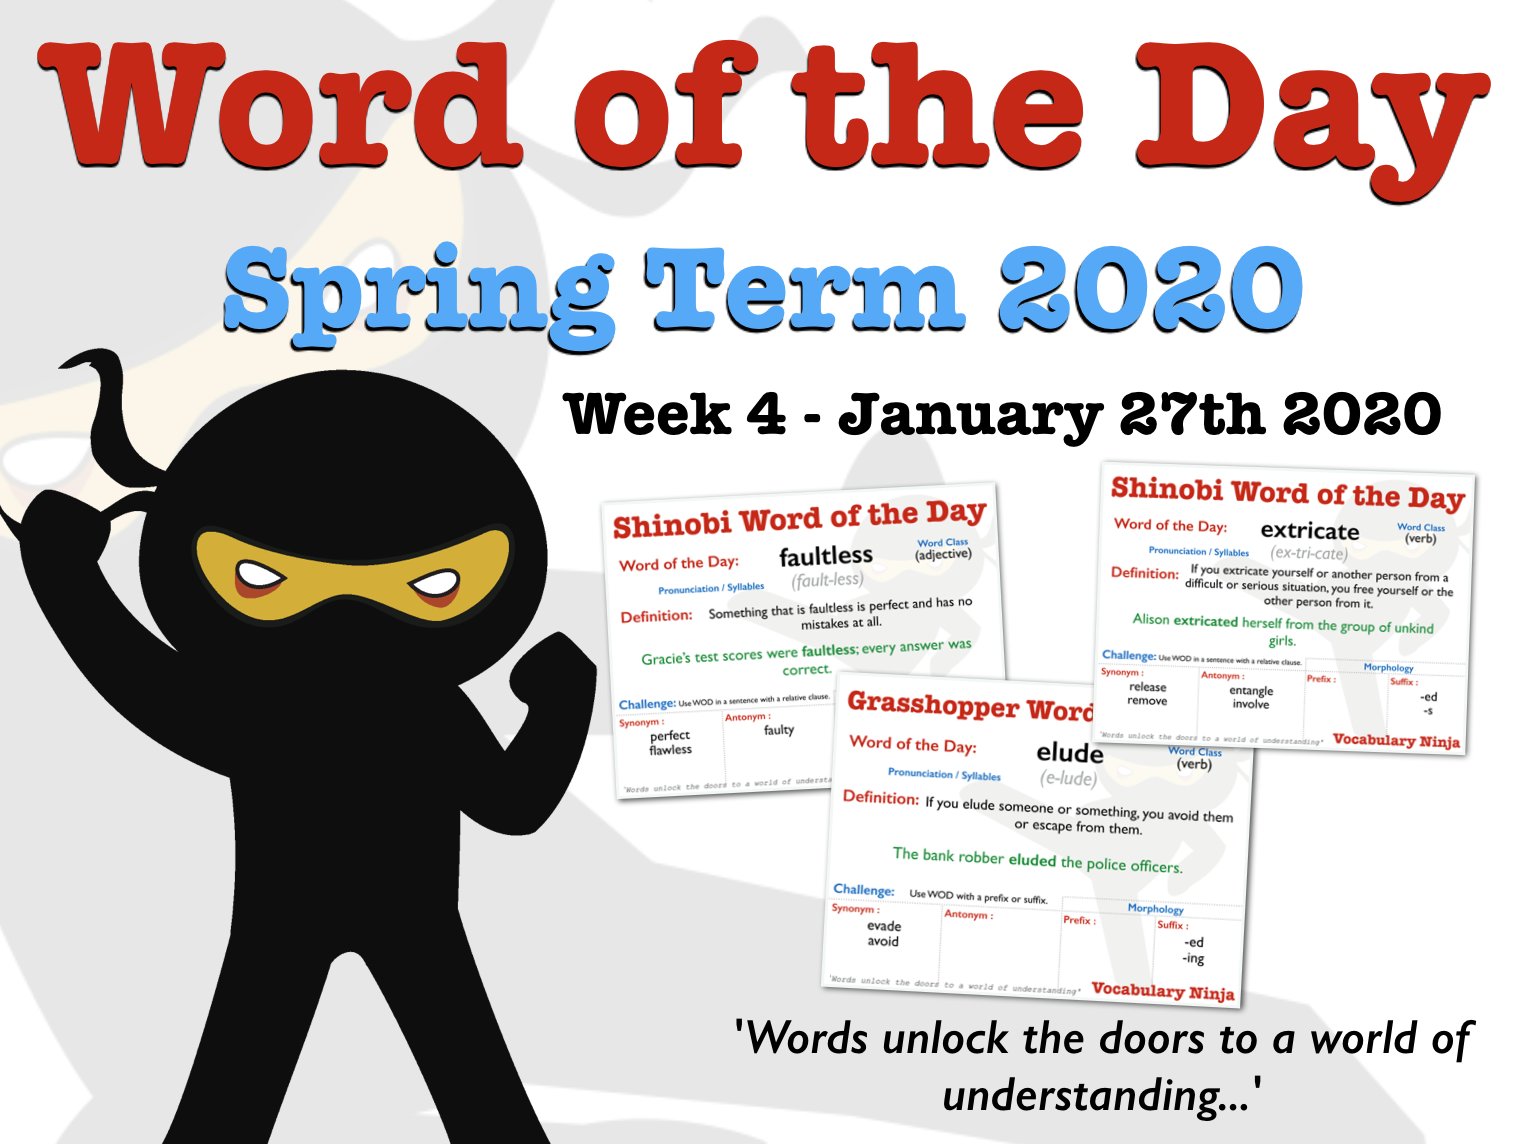 Vocabulary Ninja على X: This Week's Words for week beginning January 27th  2020 Get you hands on it now. Ten words, definitions, examples, phrases,  synonyms, antonyms and SPaG! And FREE every week!